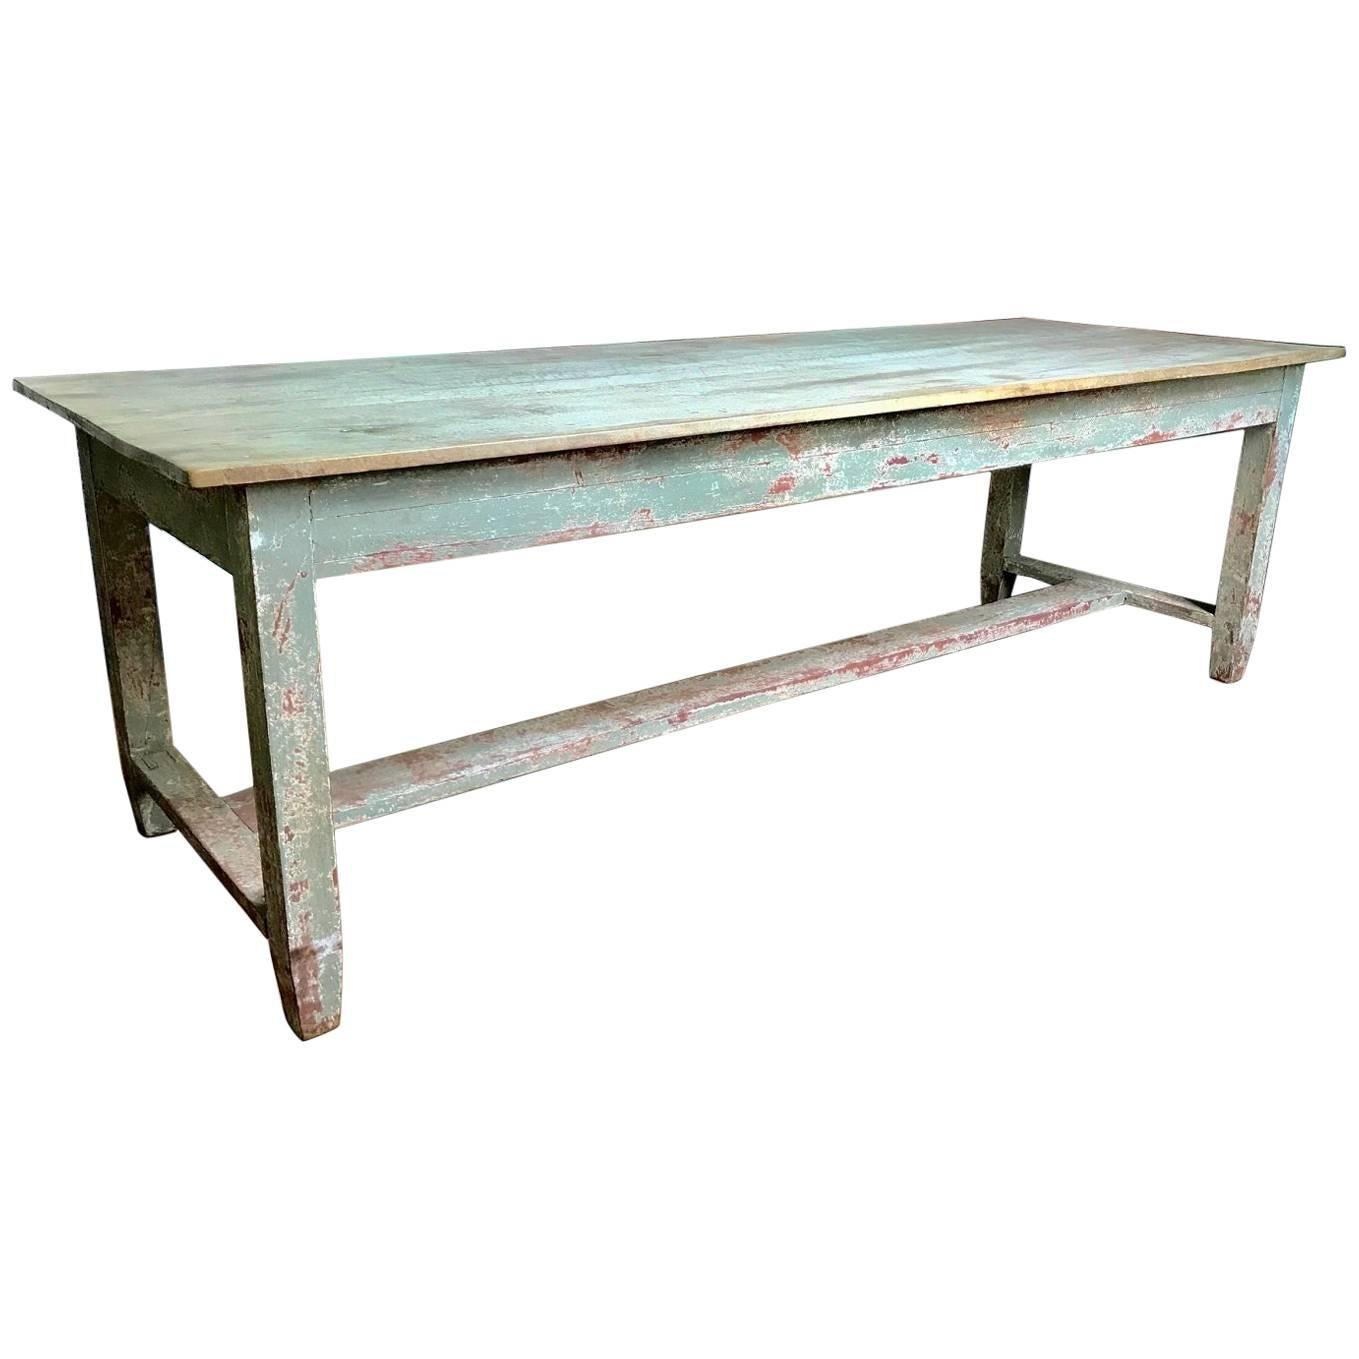 Long Painted Farm Table with Walnut Plank Top, French, 19th Century